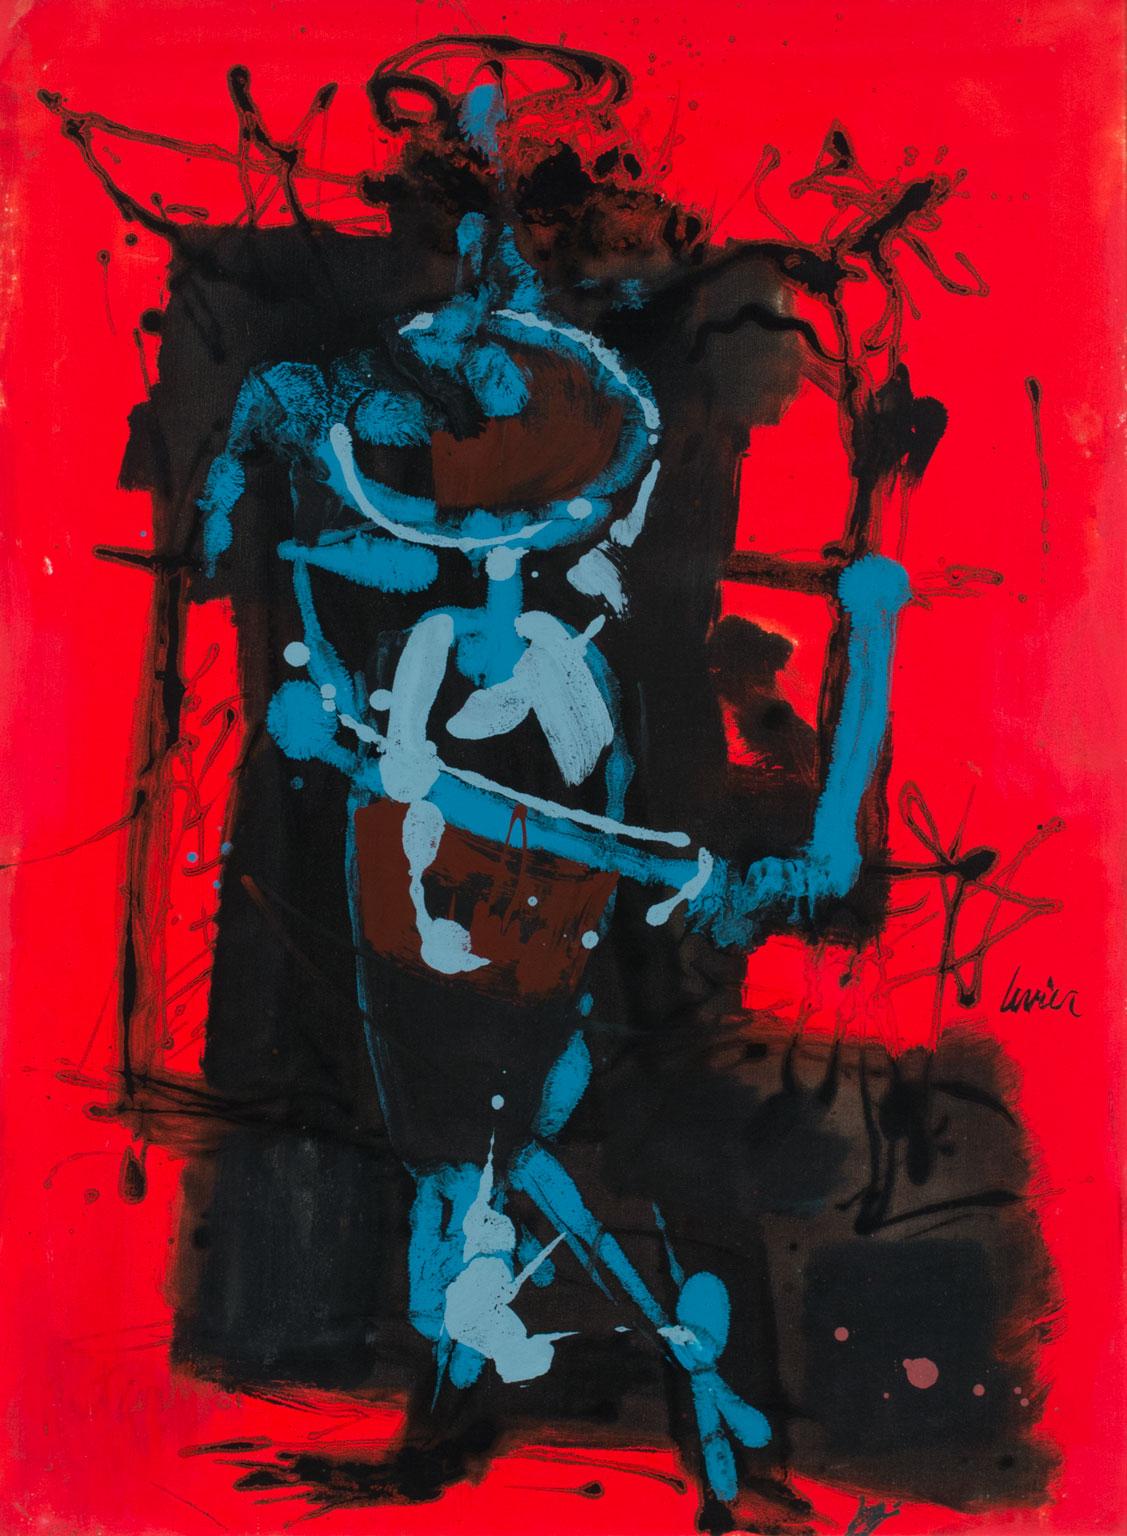 Untitled [Rouge Abstrait], an original oil on canvas by Charles Levier, is a piece for the true collector. Levier's vivid use of color projects from the painting, immediately capturing the viewer's attention. Both the technical talent of Levier and